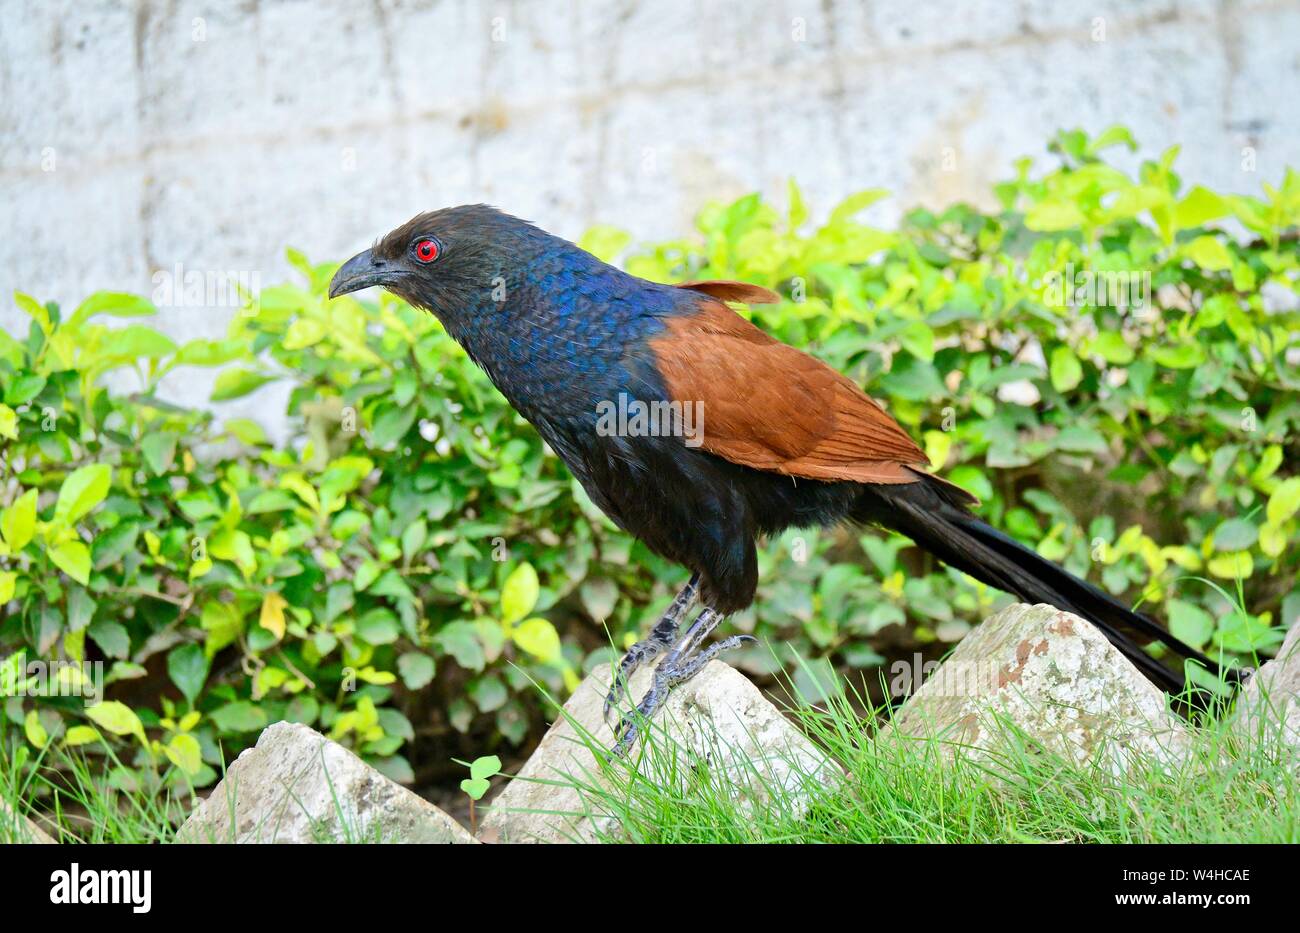 GREATER COUCAL Stockfoto